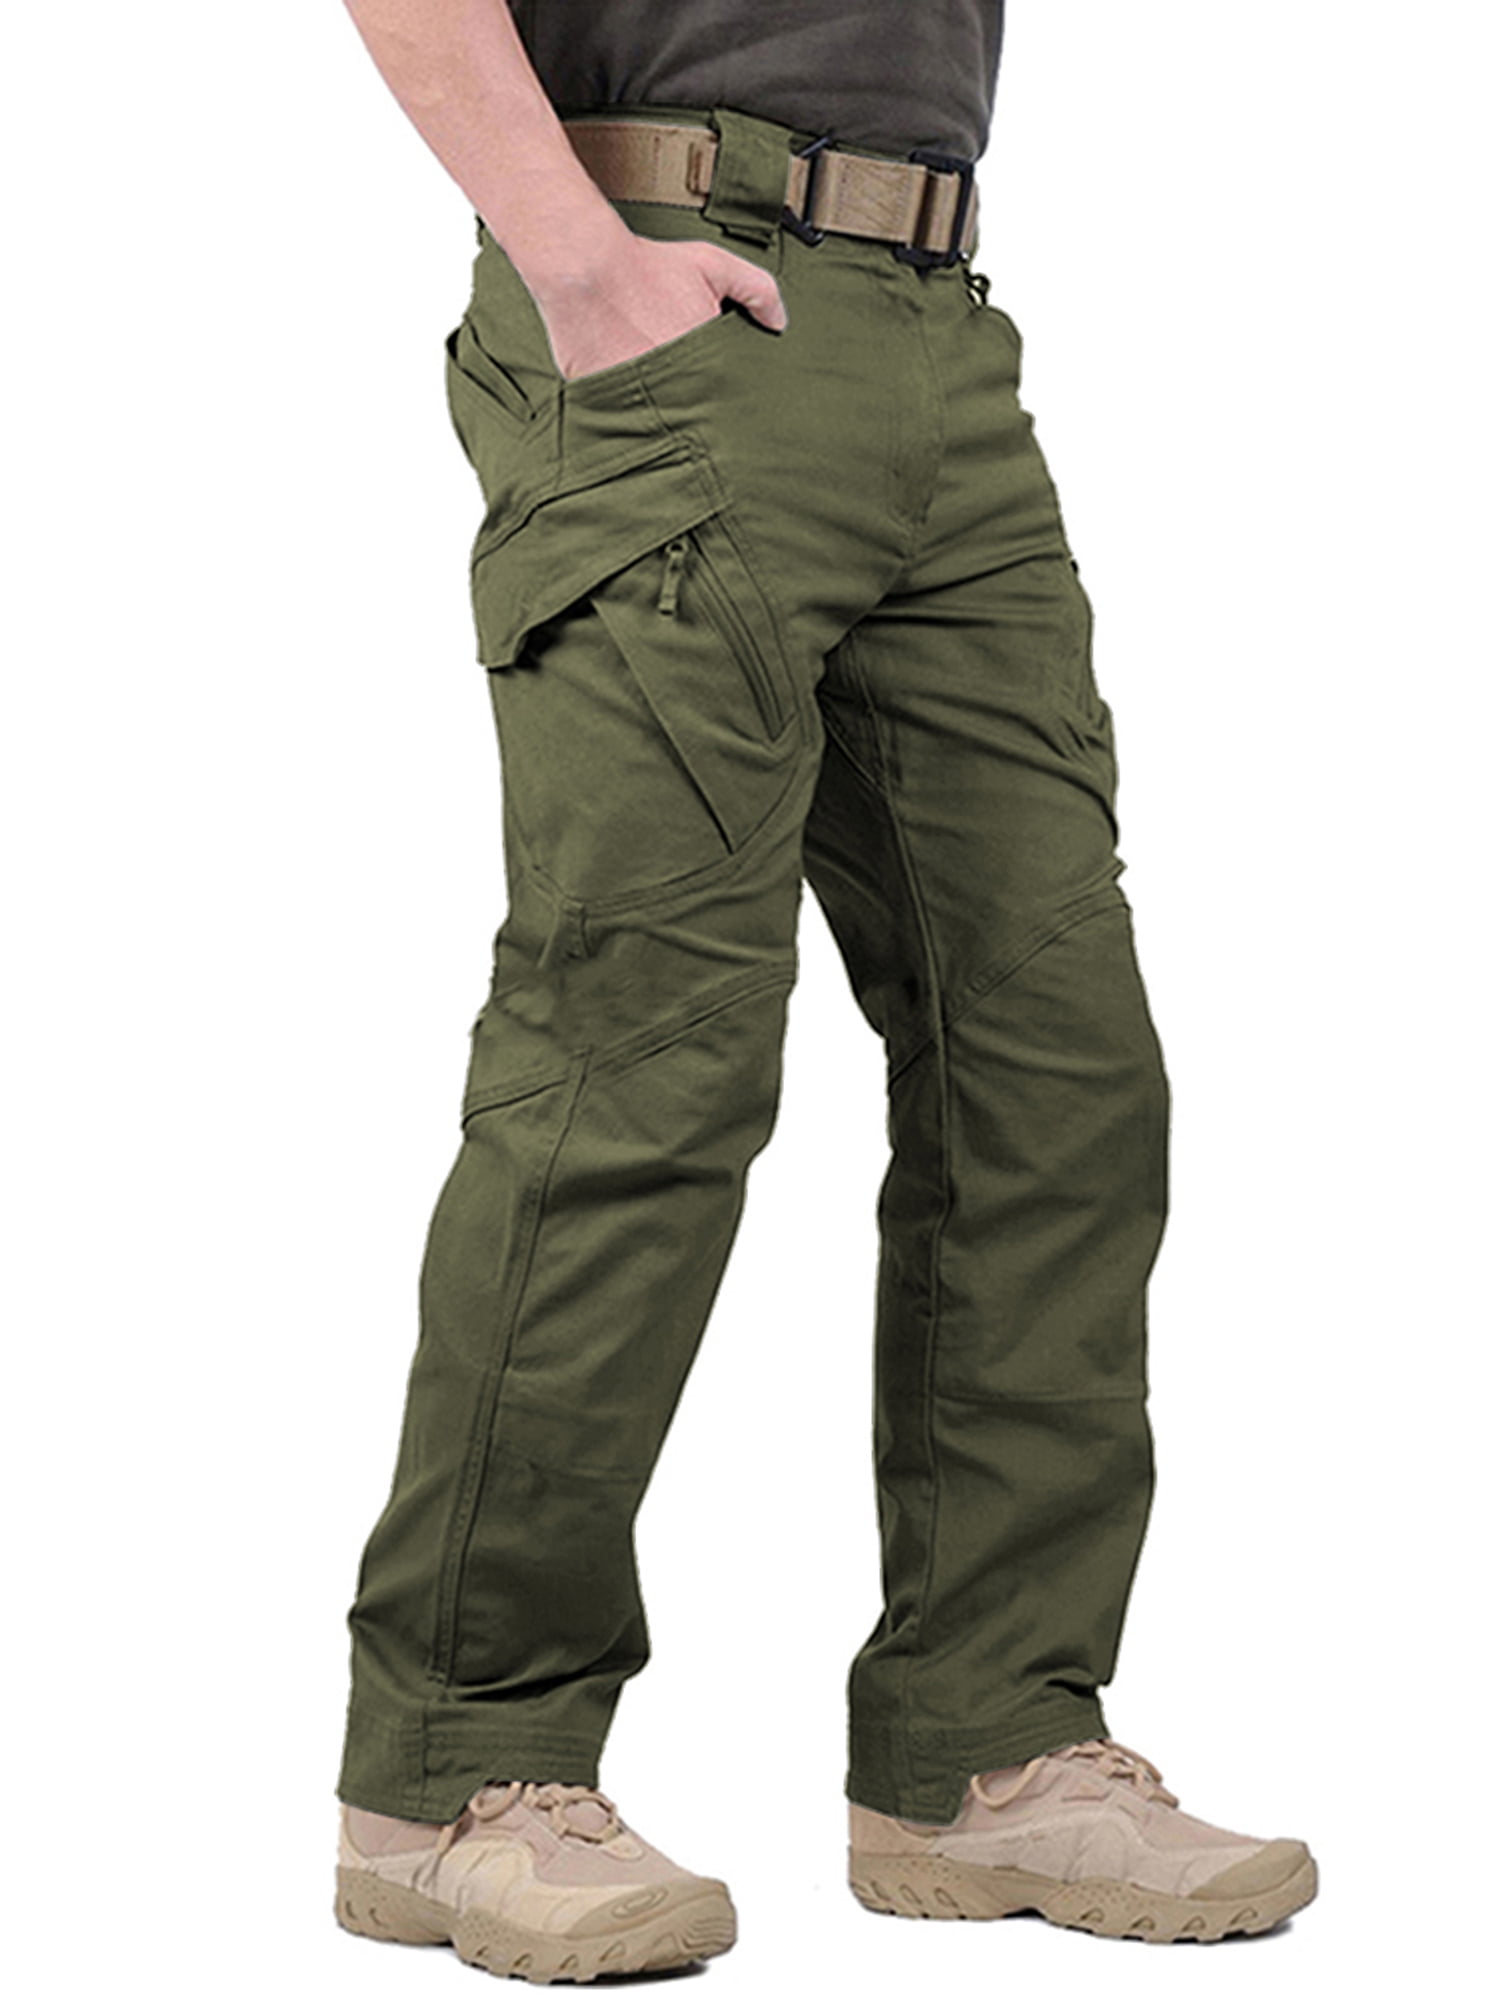 FEDTOSING Relaxed Work Cargo Pants Outdoor Mens Pant Army Green,Size 38 ...